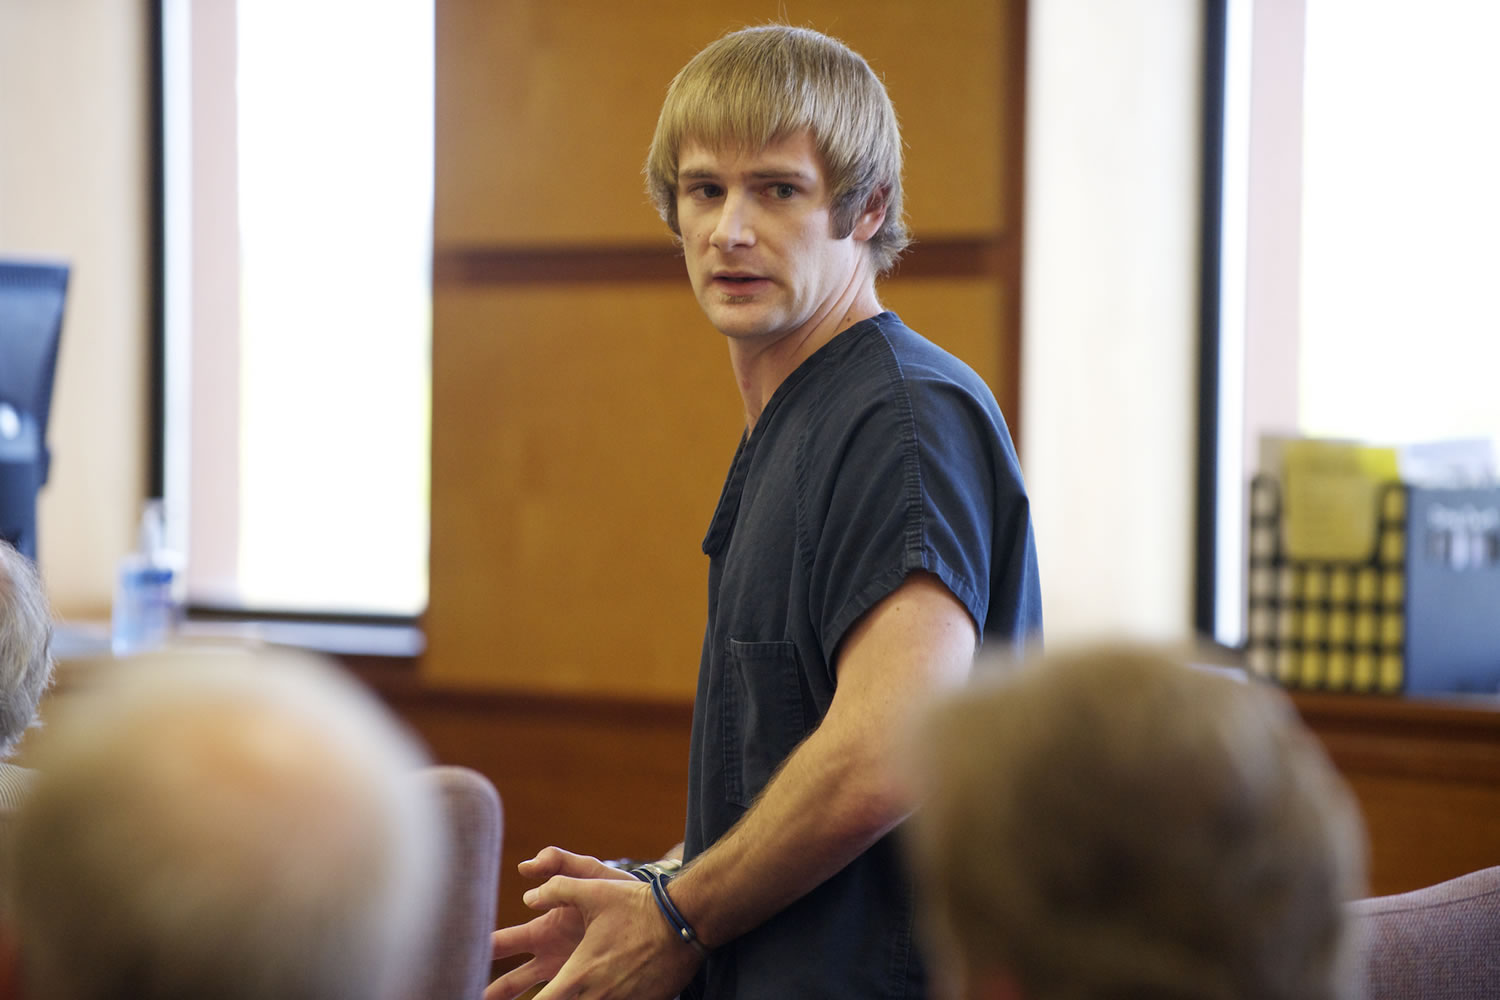 Cody James Dornbirer, 23, was sentenced to 11 months Friday for the third-degree rape of a friend in May 2011 in Vancouver. Today, he appeared in Clark County Superior Court on suspicion of stealing from his grandmother.